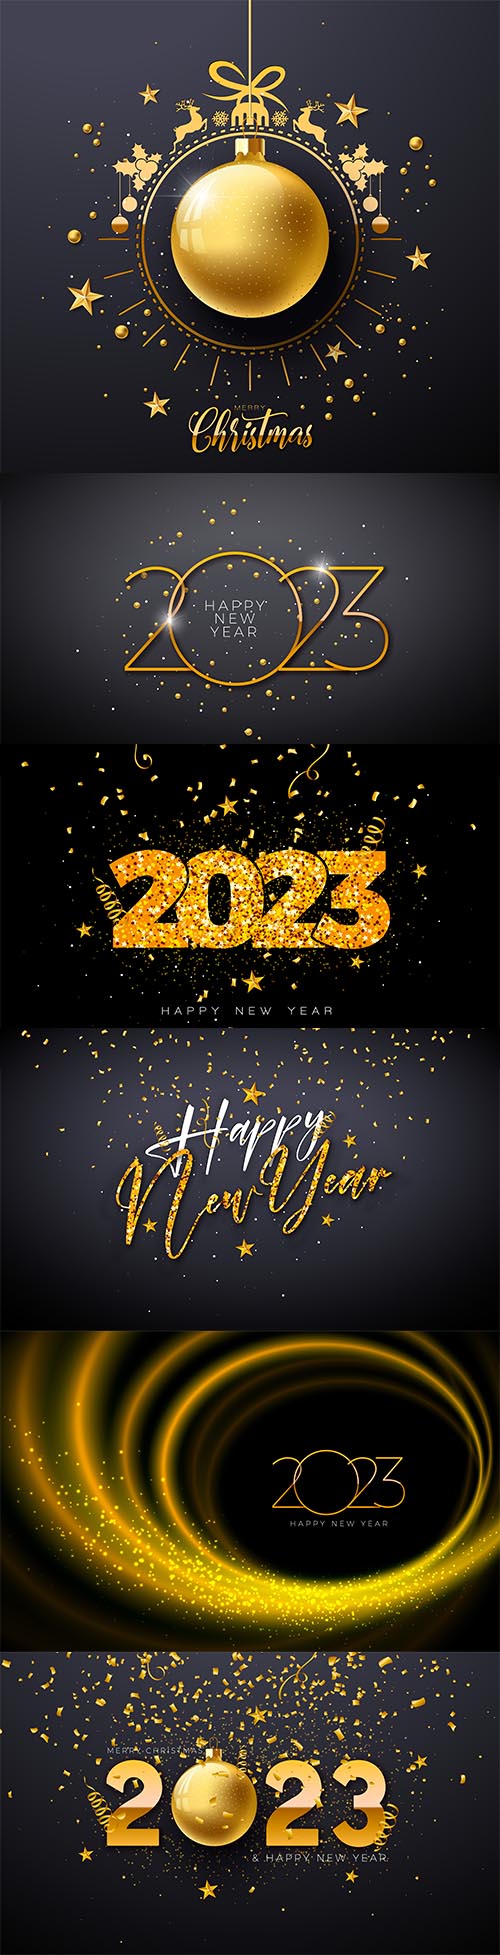 Vector happy new year 2023 illustration with gold lettering